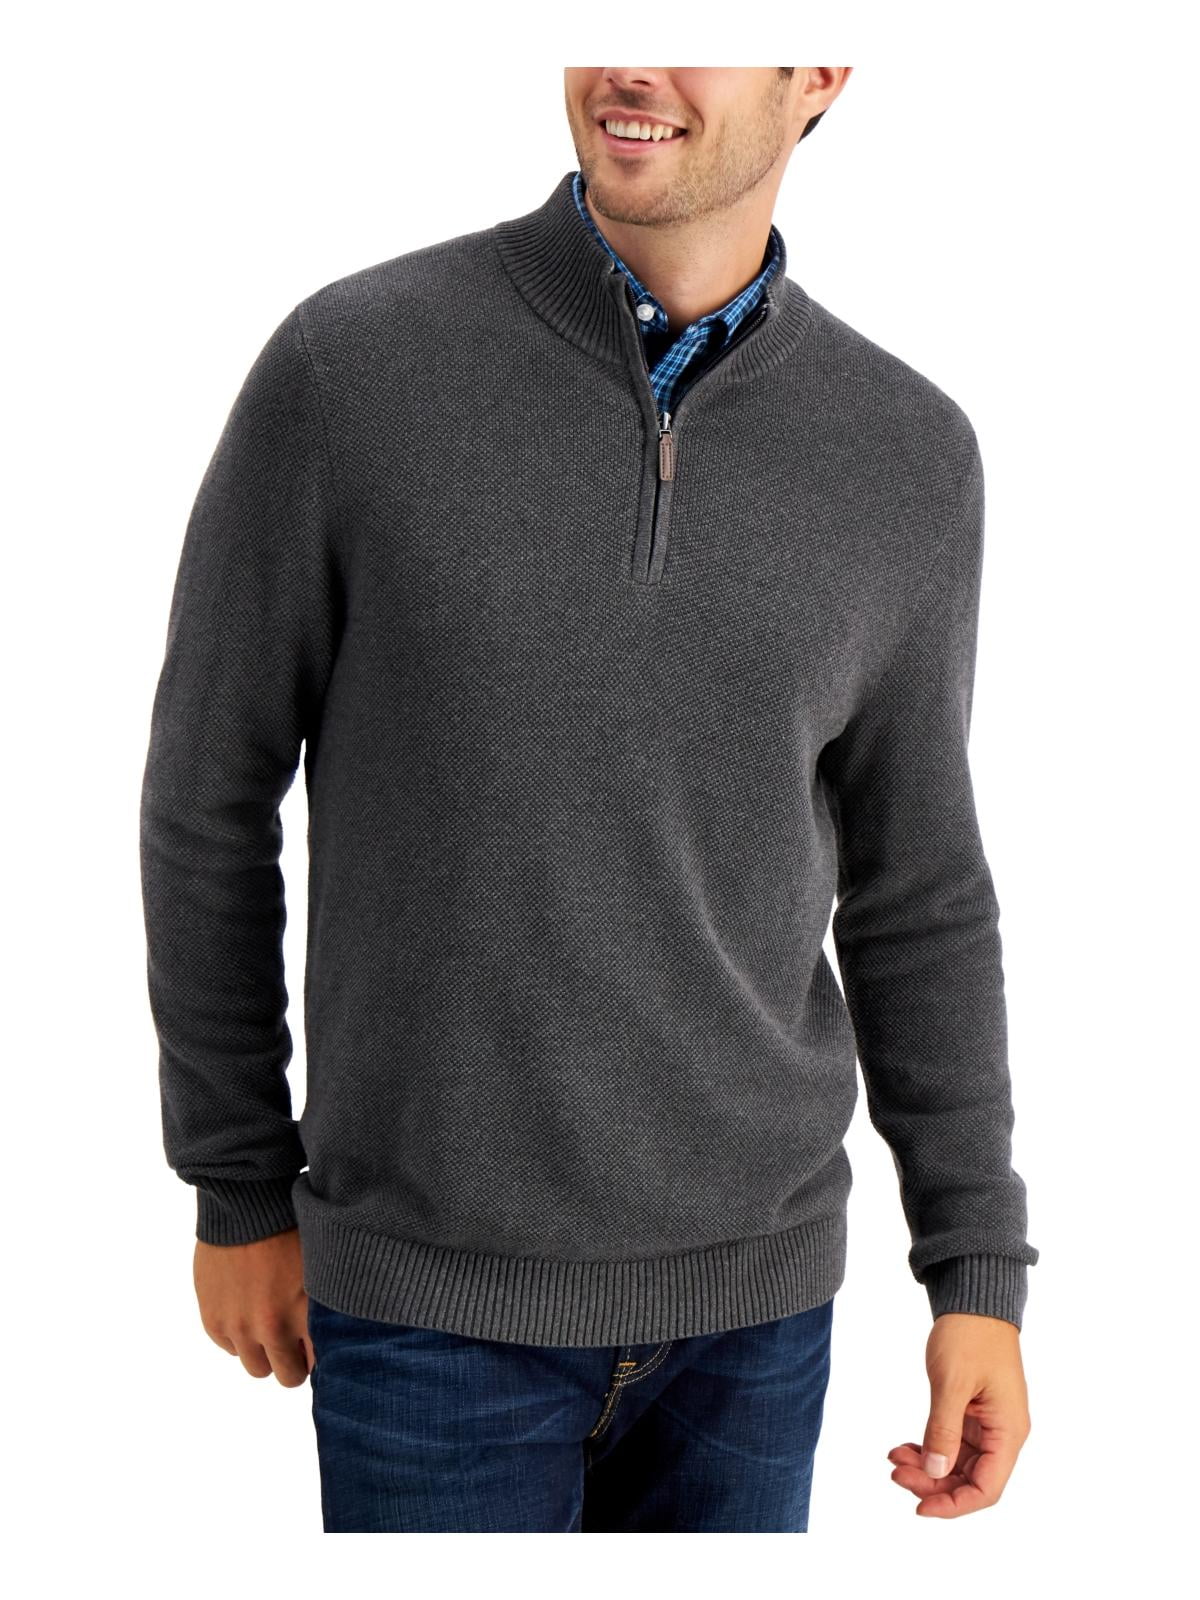 Club Room Mens Cotton 1/4 Zip Pullover Sweater